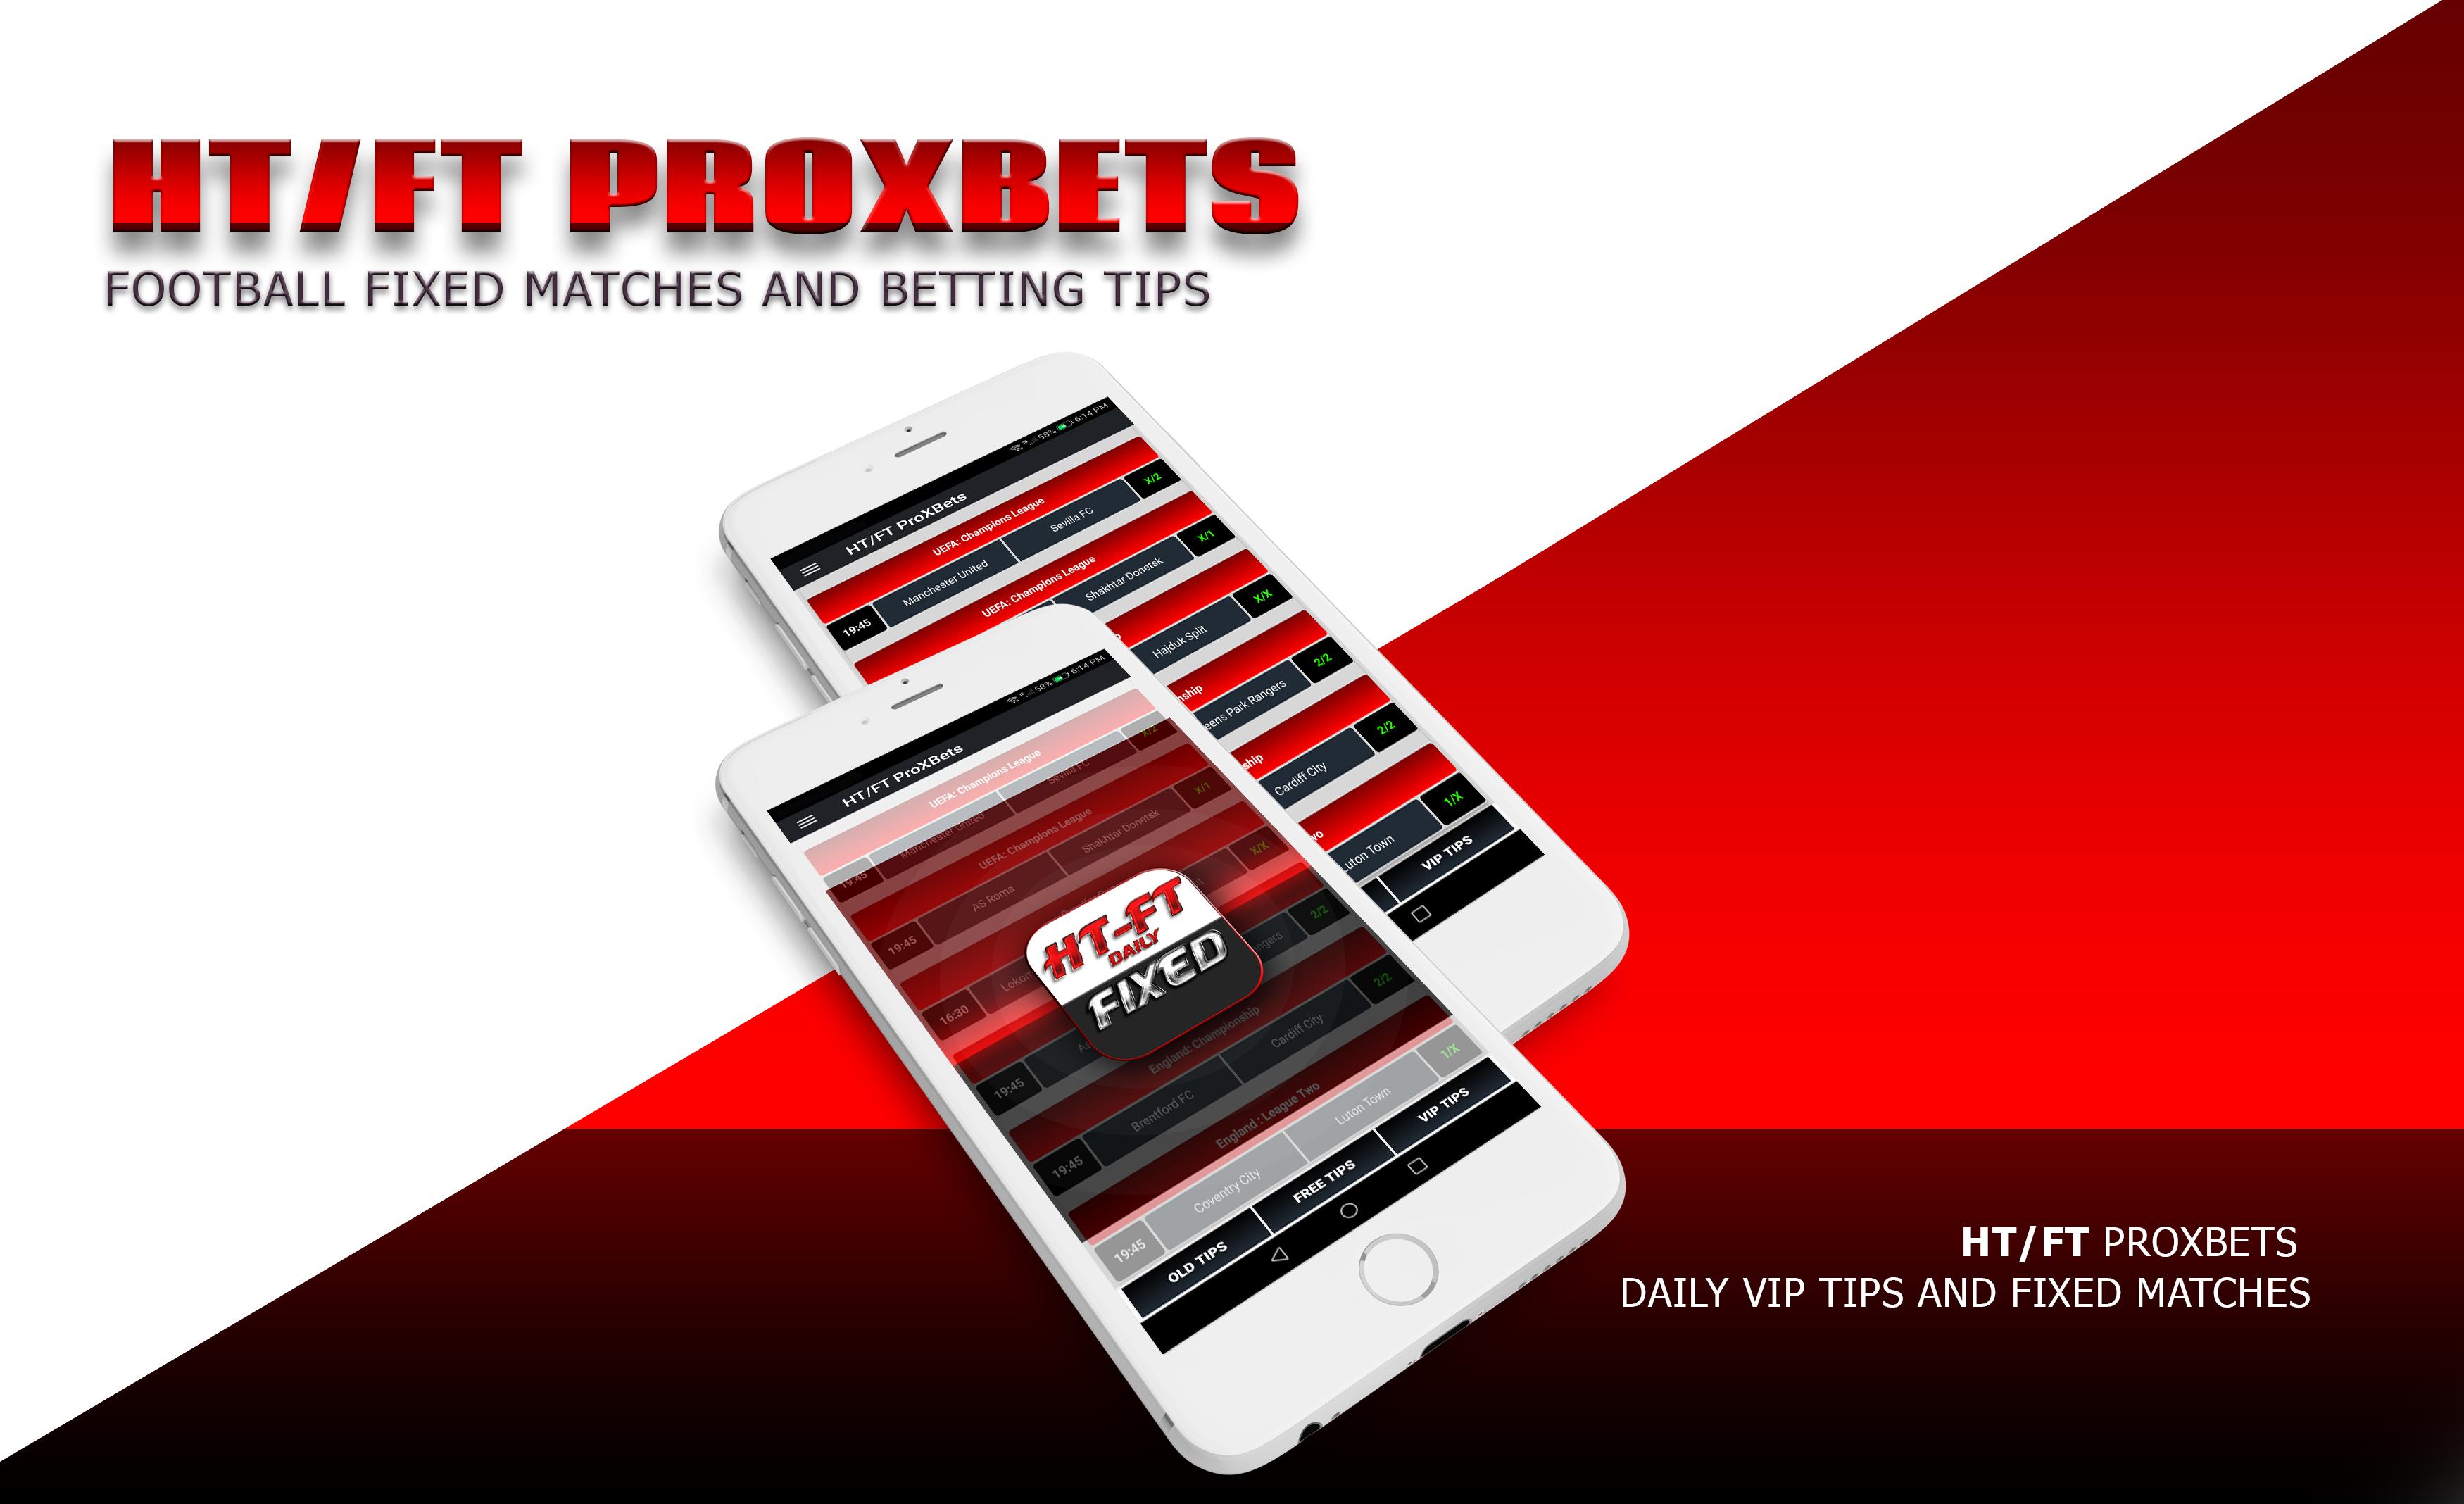 Matched betting matches. Fixed betting Tips. Betting apps.